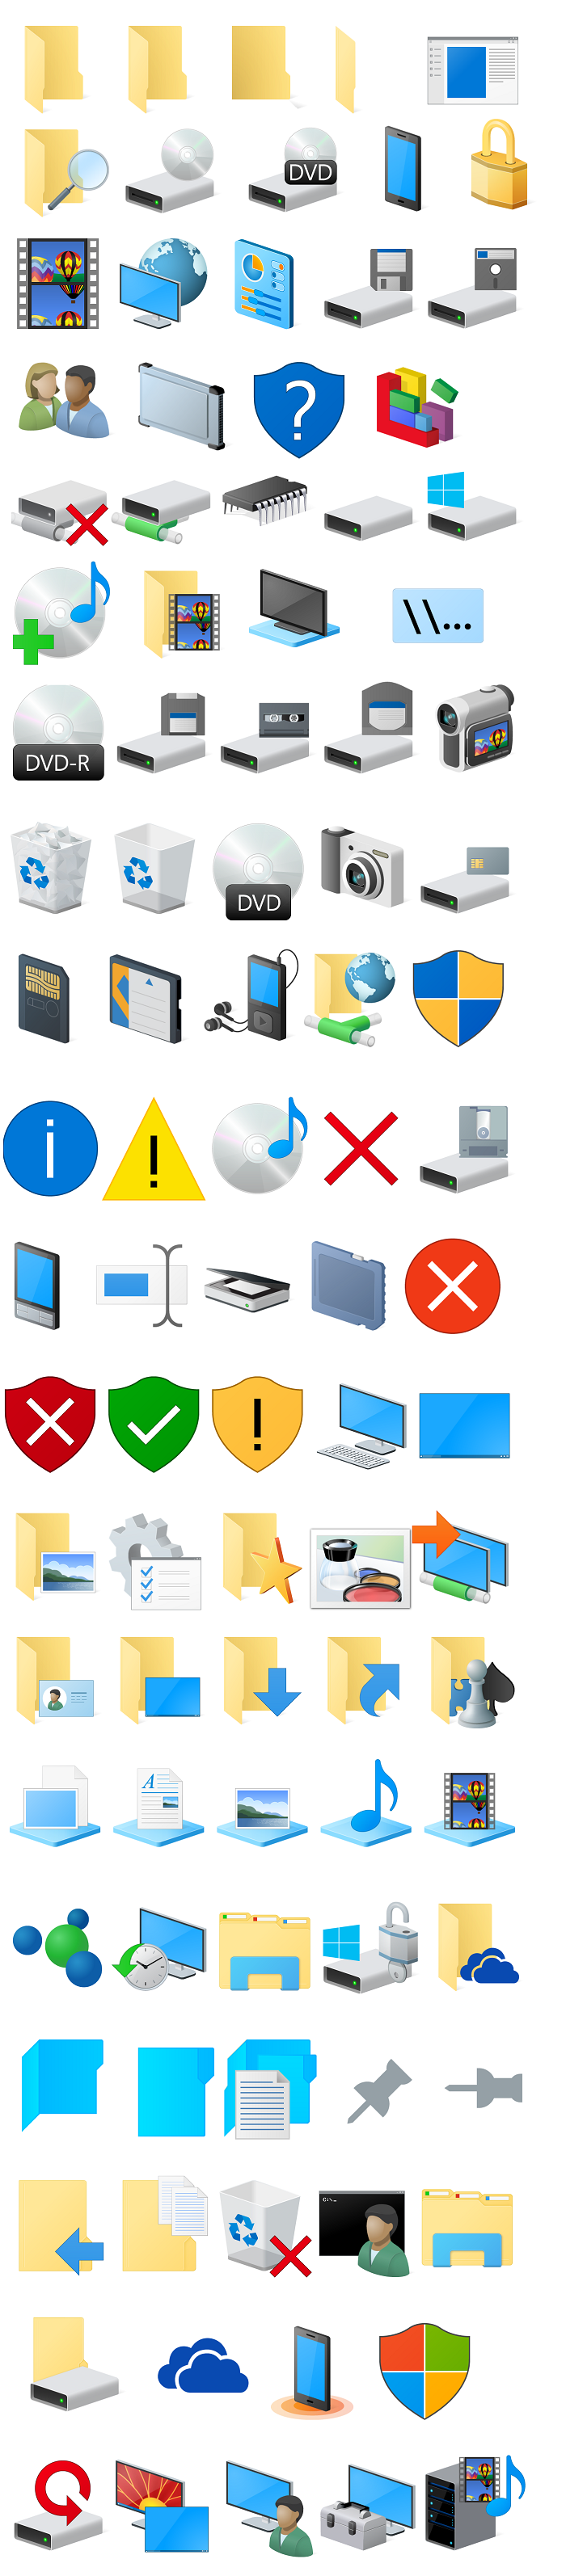 1432559187_windows10icons.png